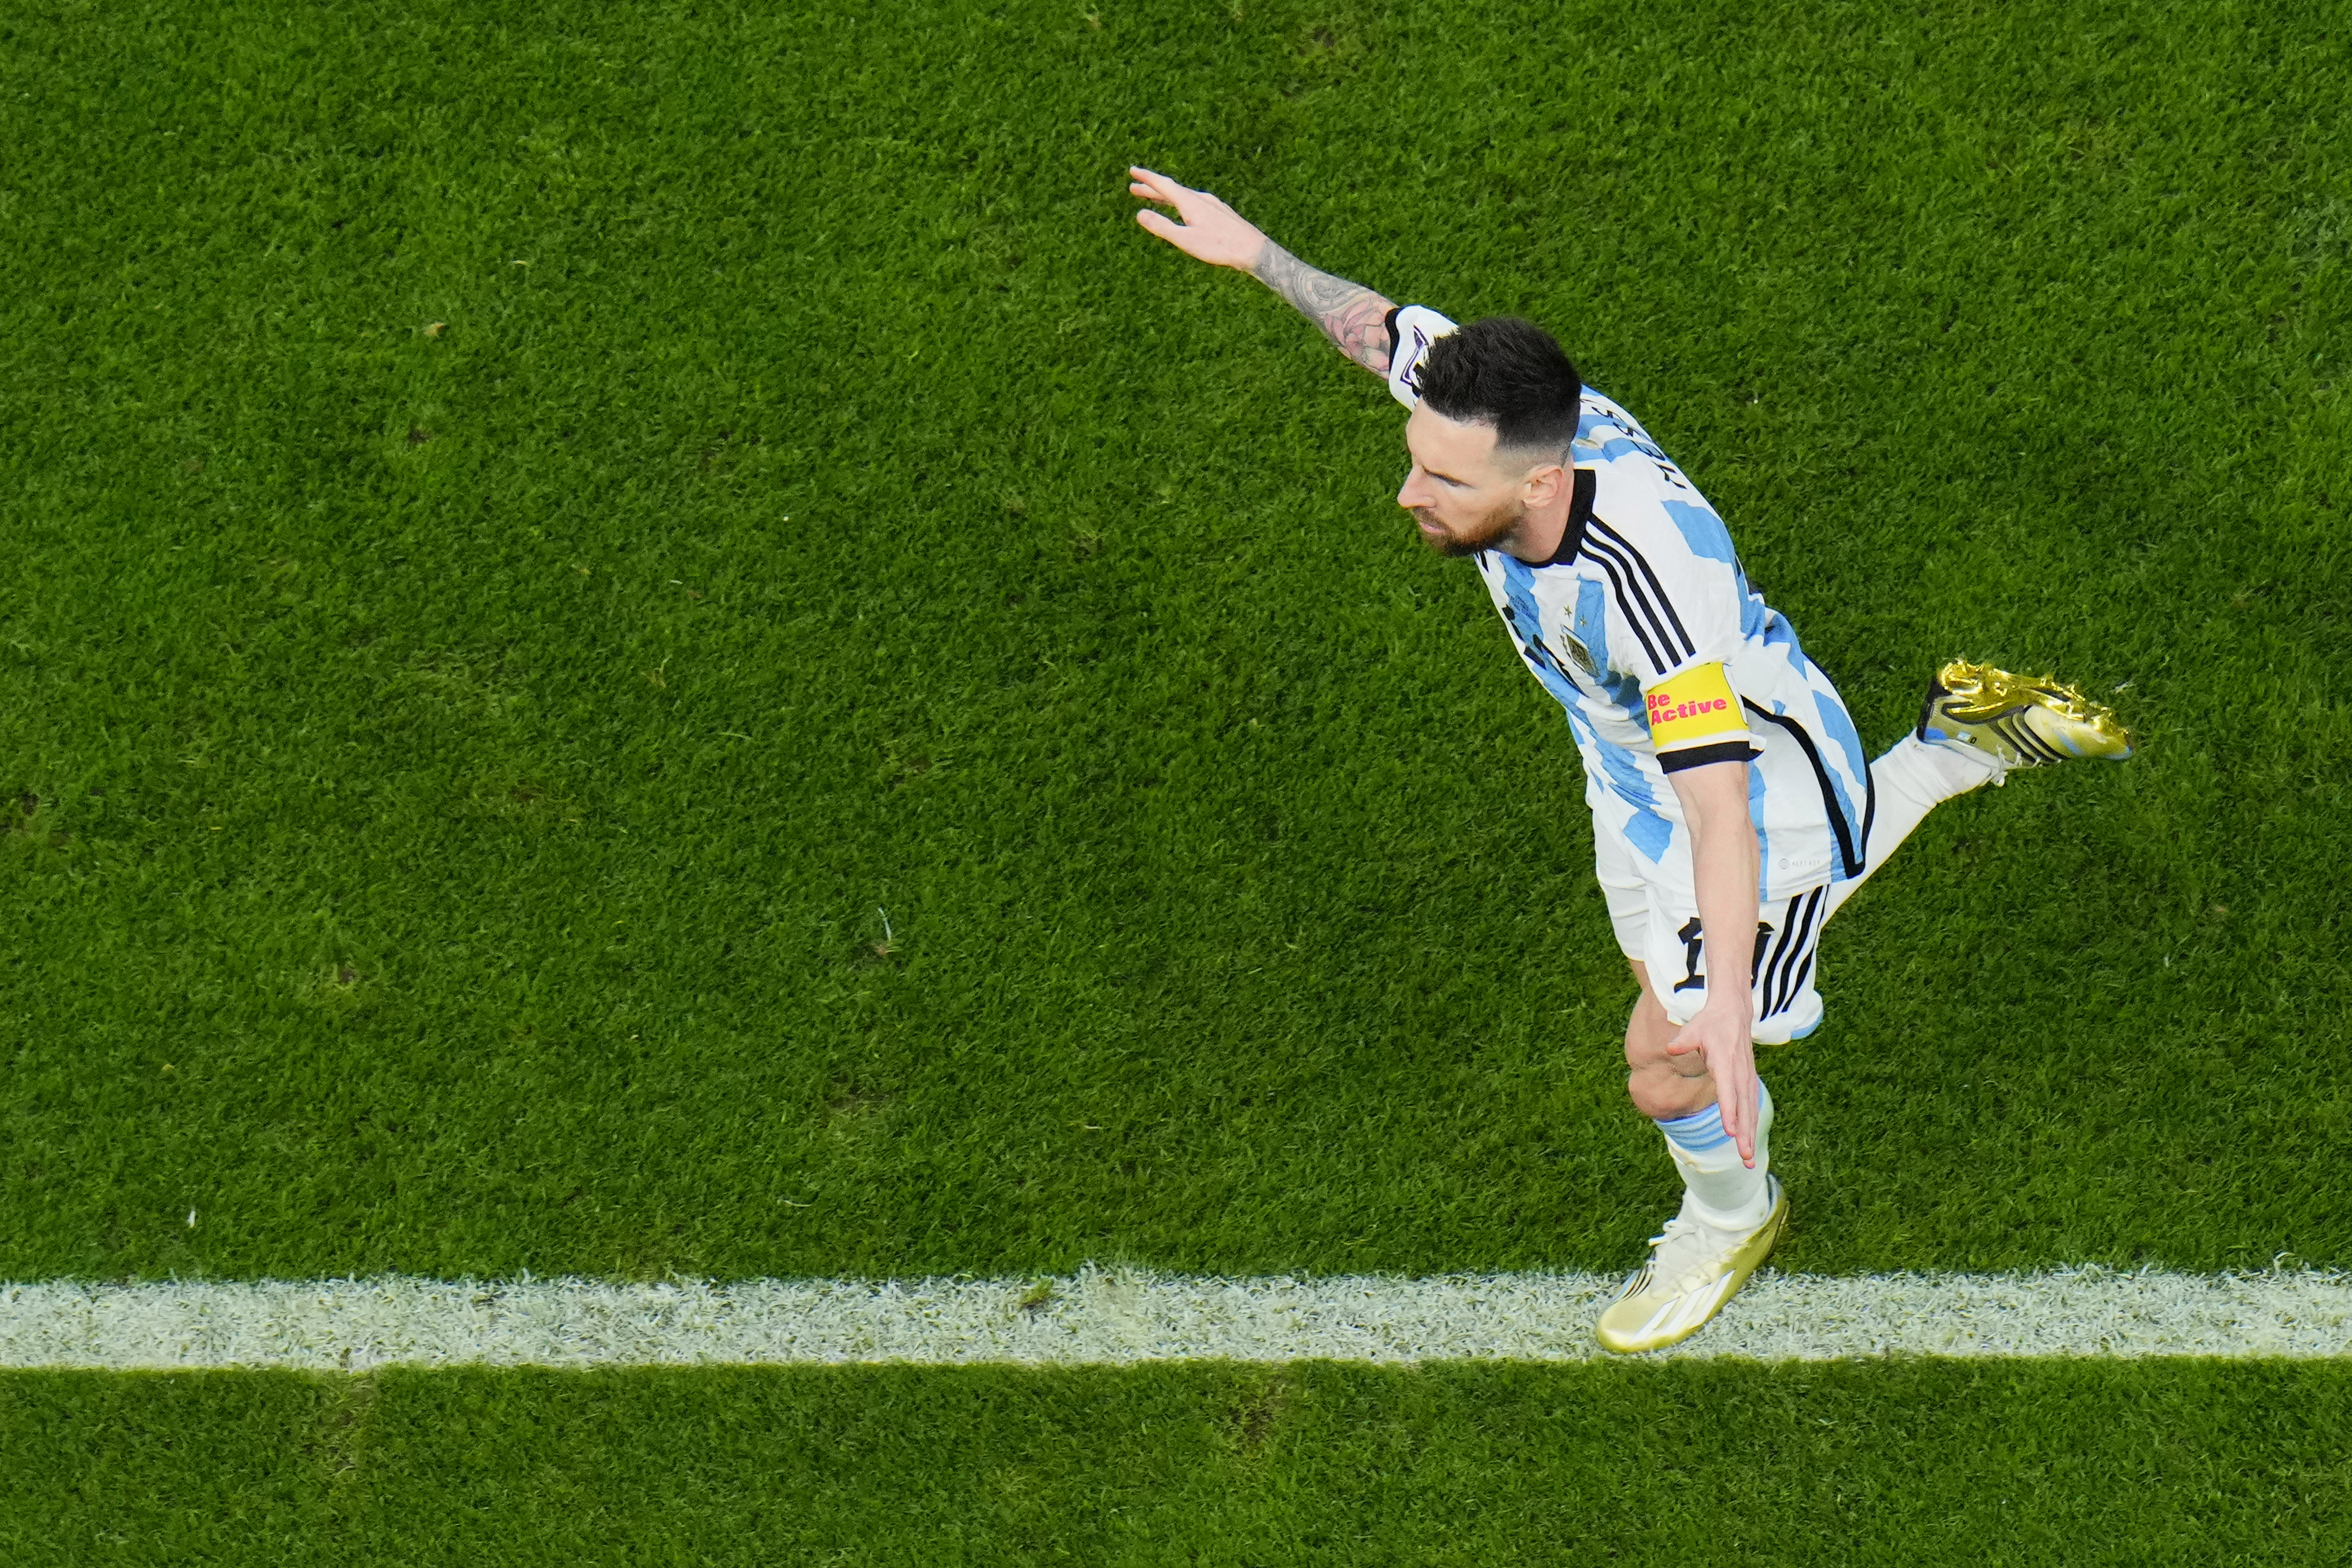 FIFA World Cup Final Preview - Argentina vs